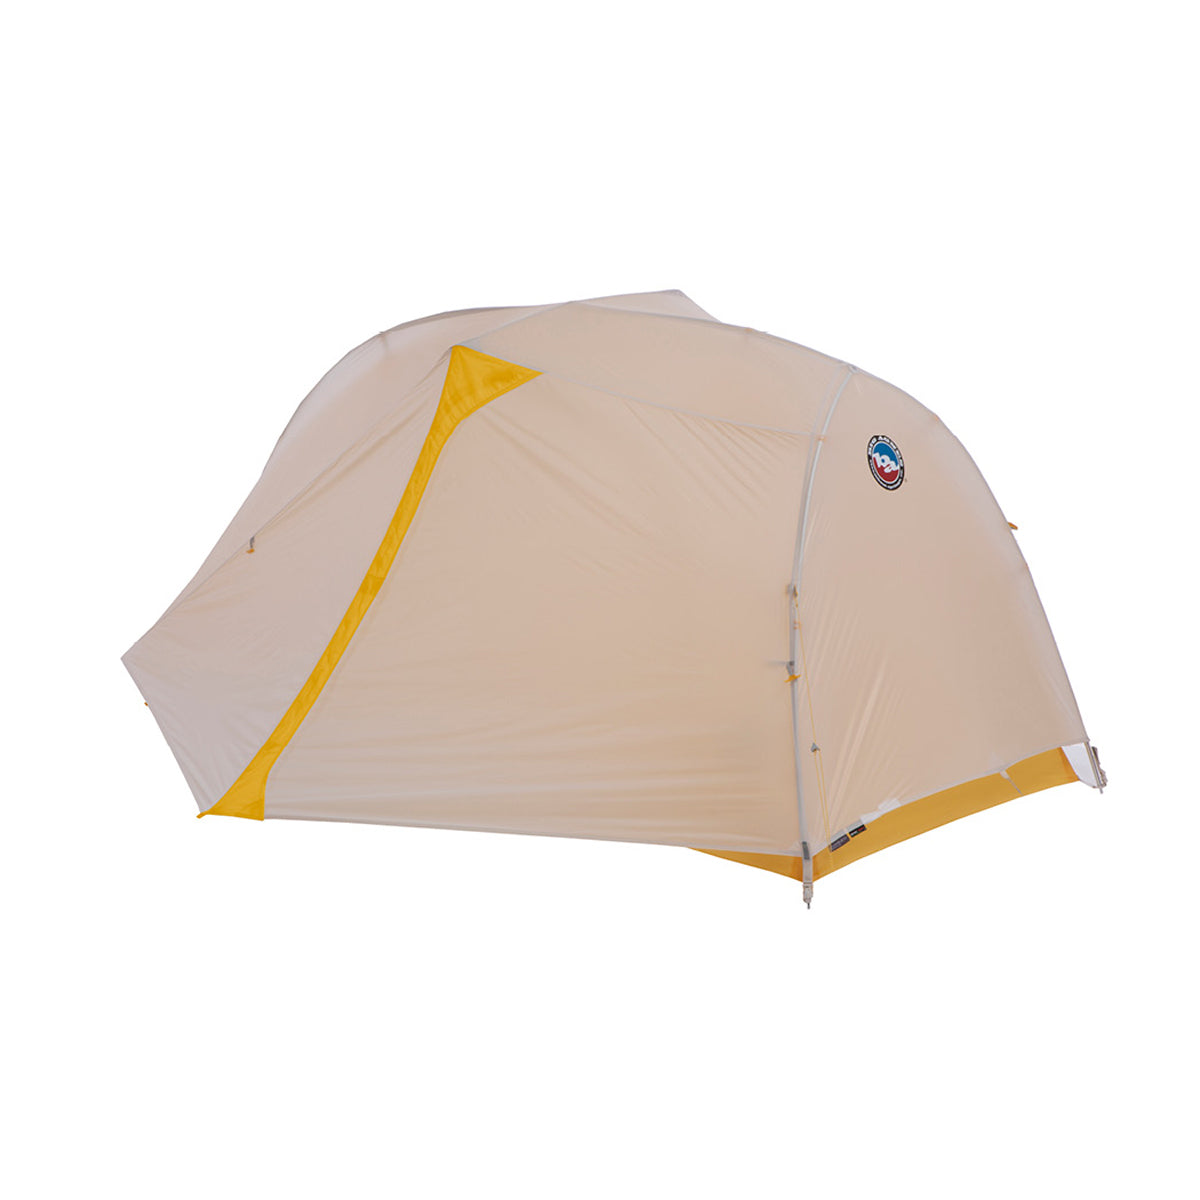 Big Agnes Tiger Wall UL 1 Person Solution Dye Tent